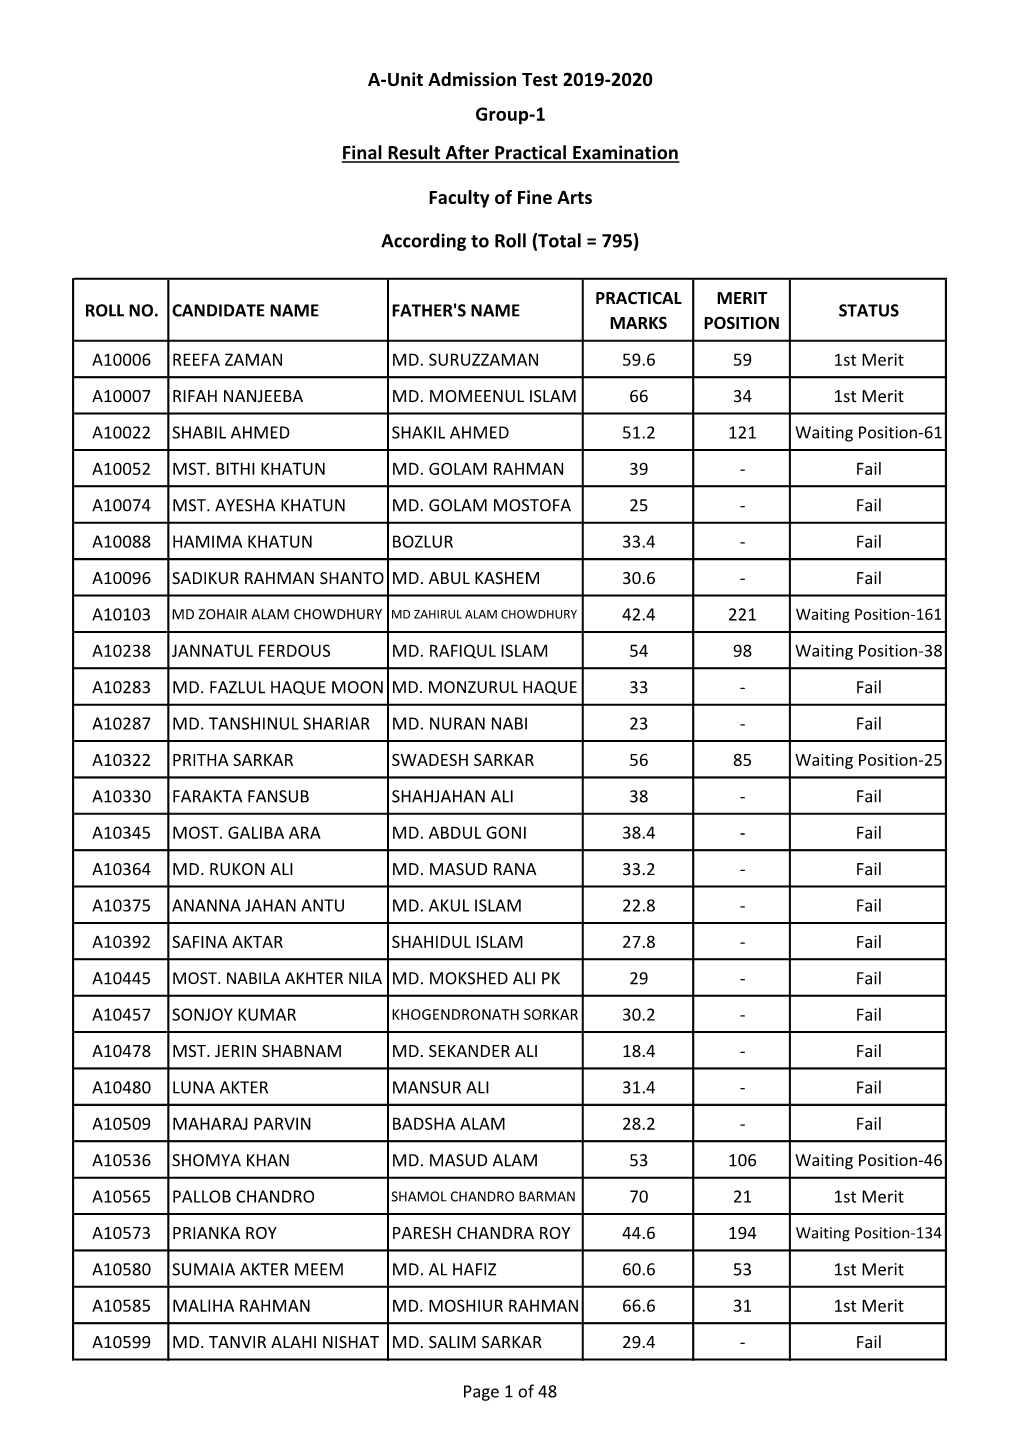 (Total = 795) Faculty of Fine Arts Final Result After Practical Examination